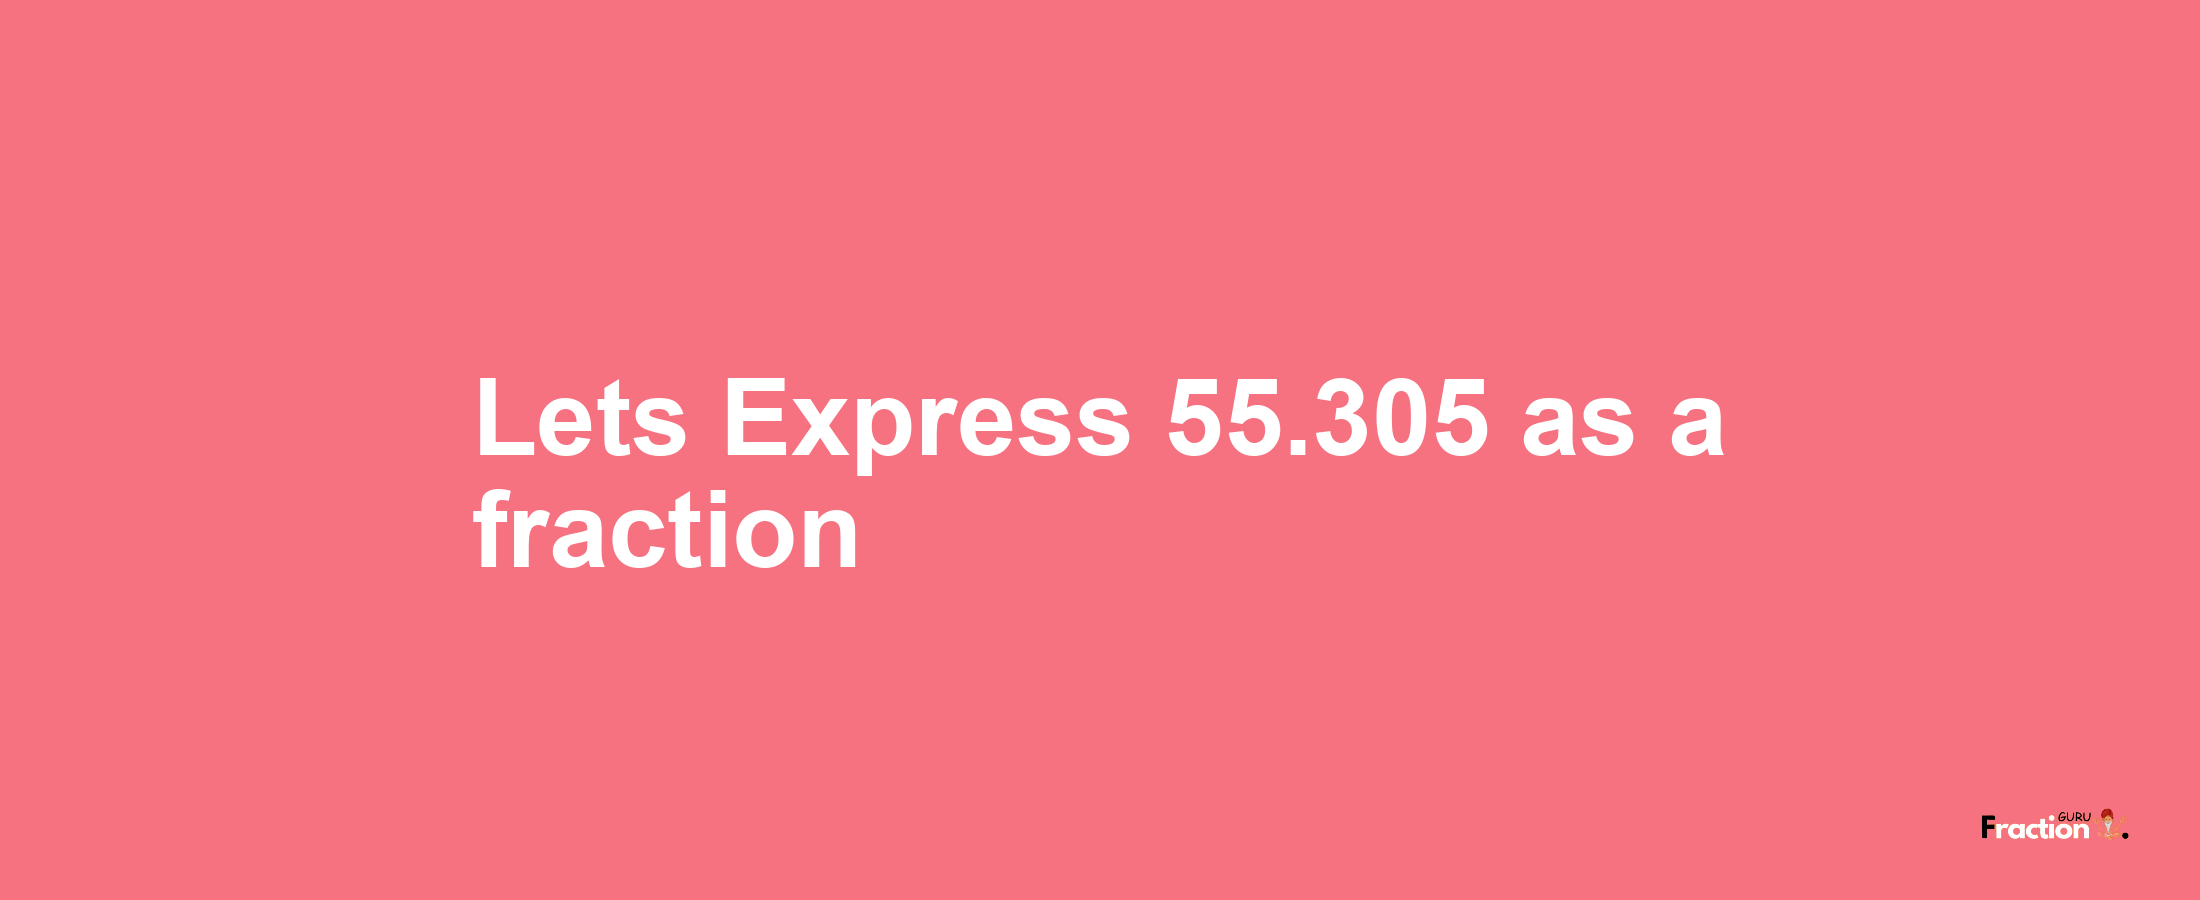 Lets Express 55.305 as afraction